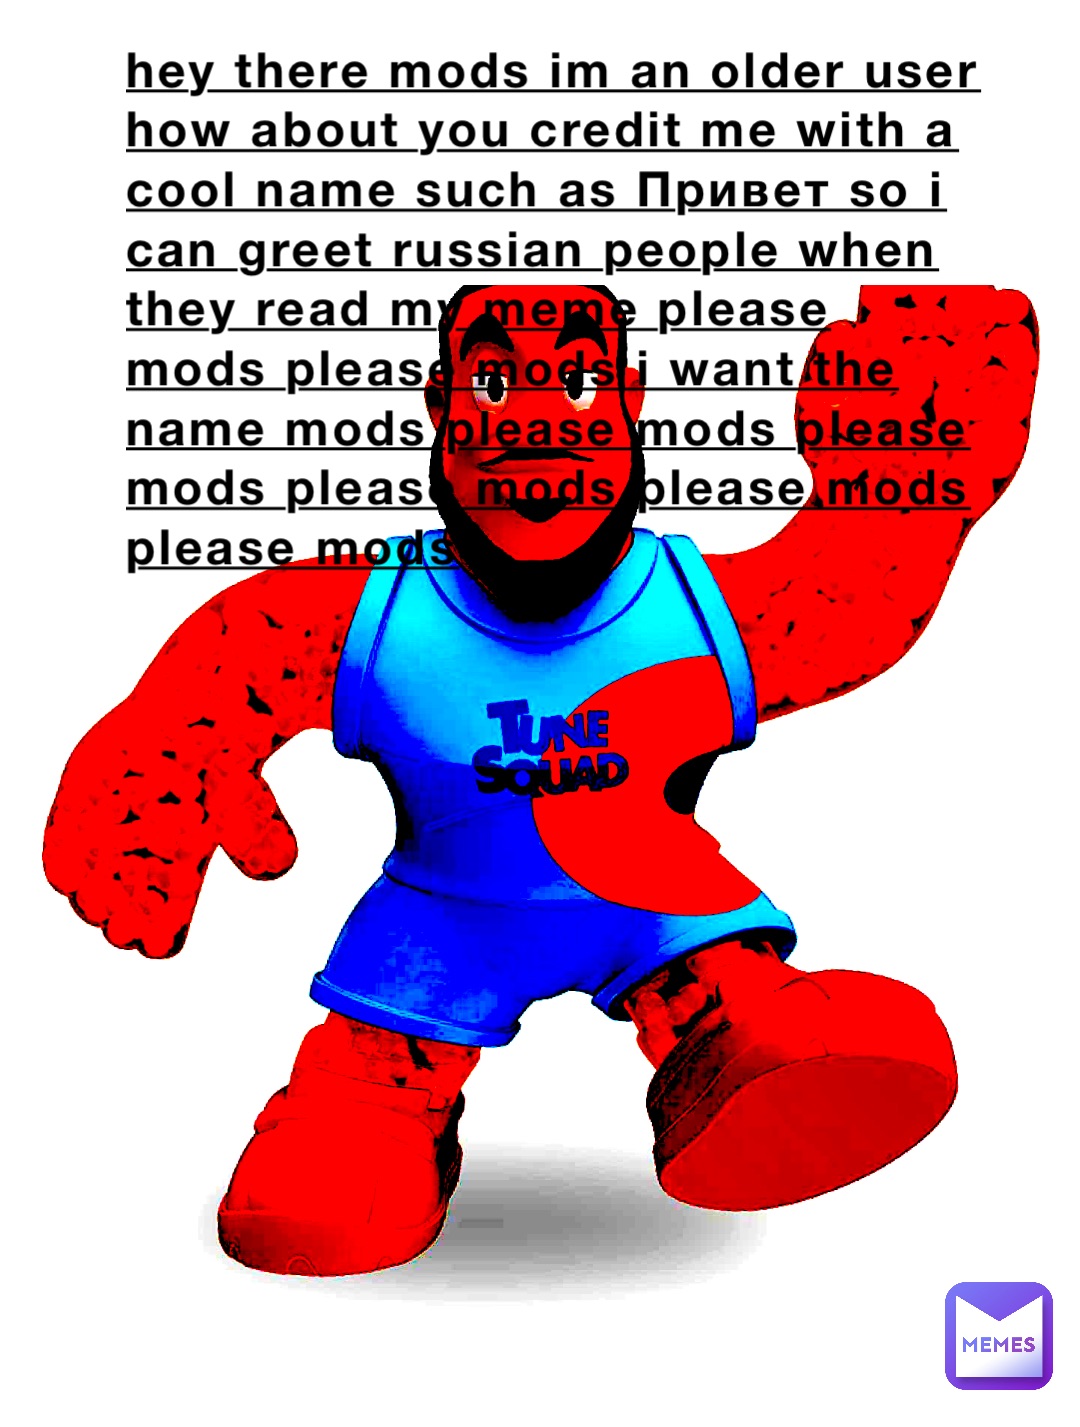 hey there mods im an older user how about you credit me with a cool name such as Привет so i can greet russian people when they read my meme please mods please mods i want the name mods please mods please mods please mods please mods please mods